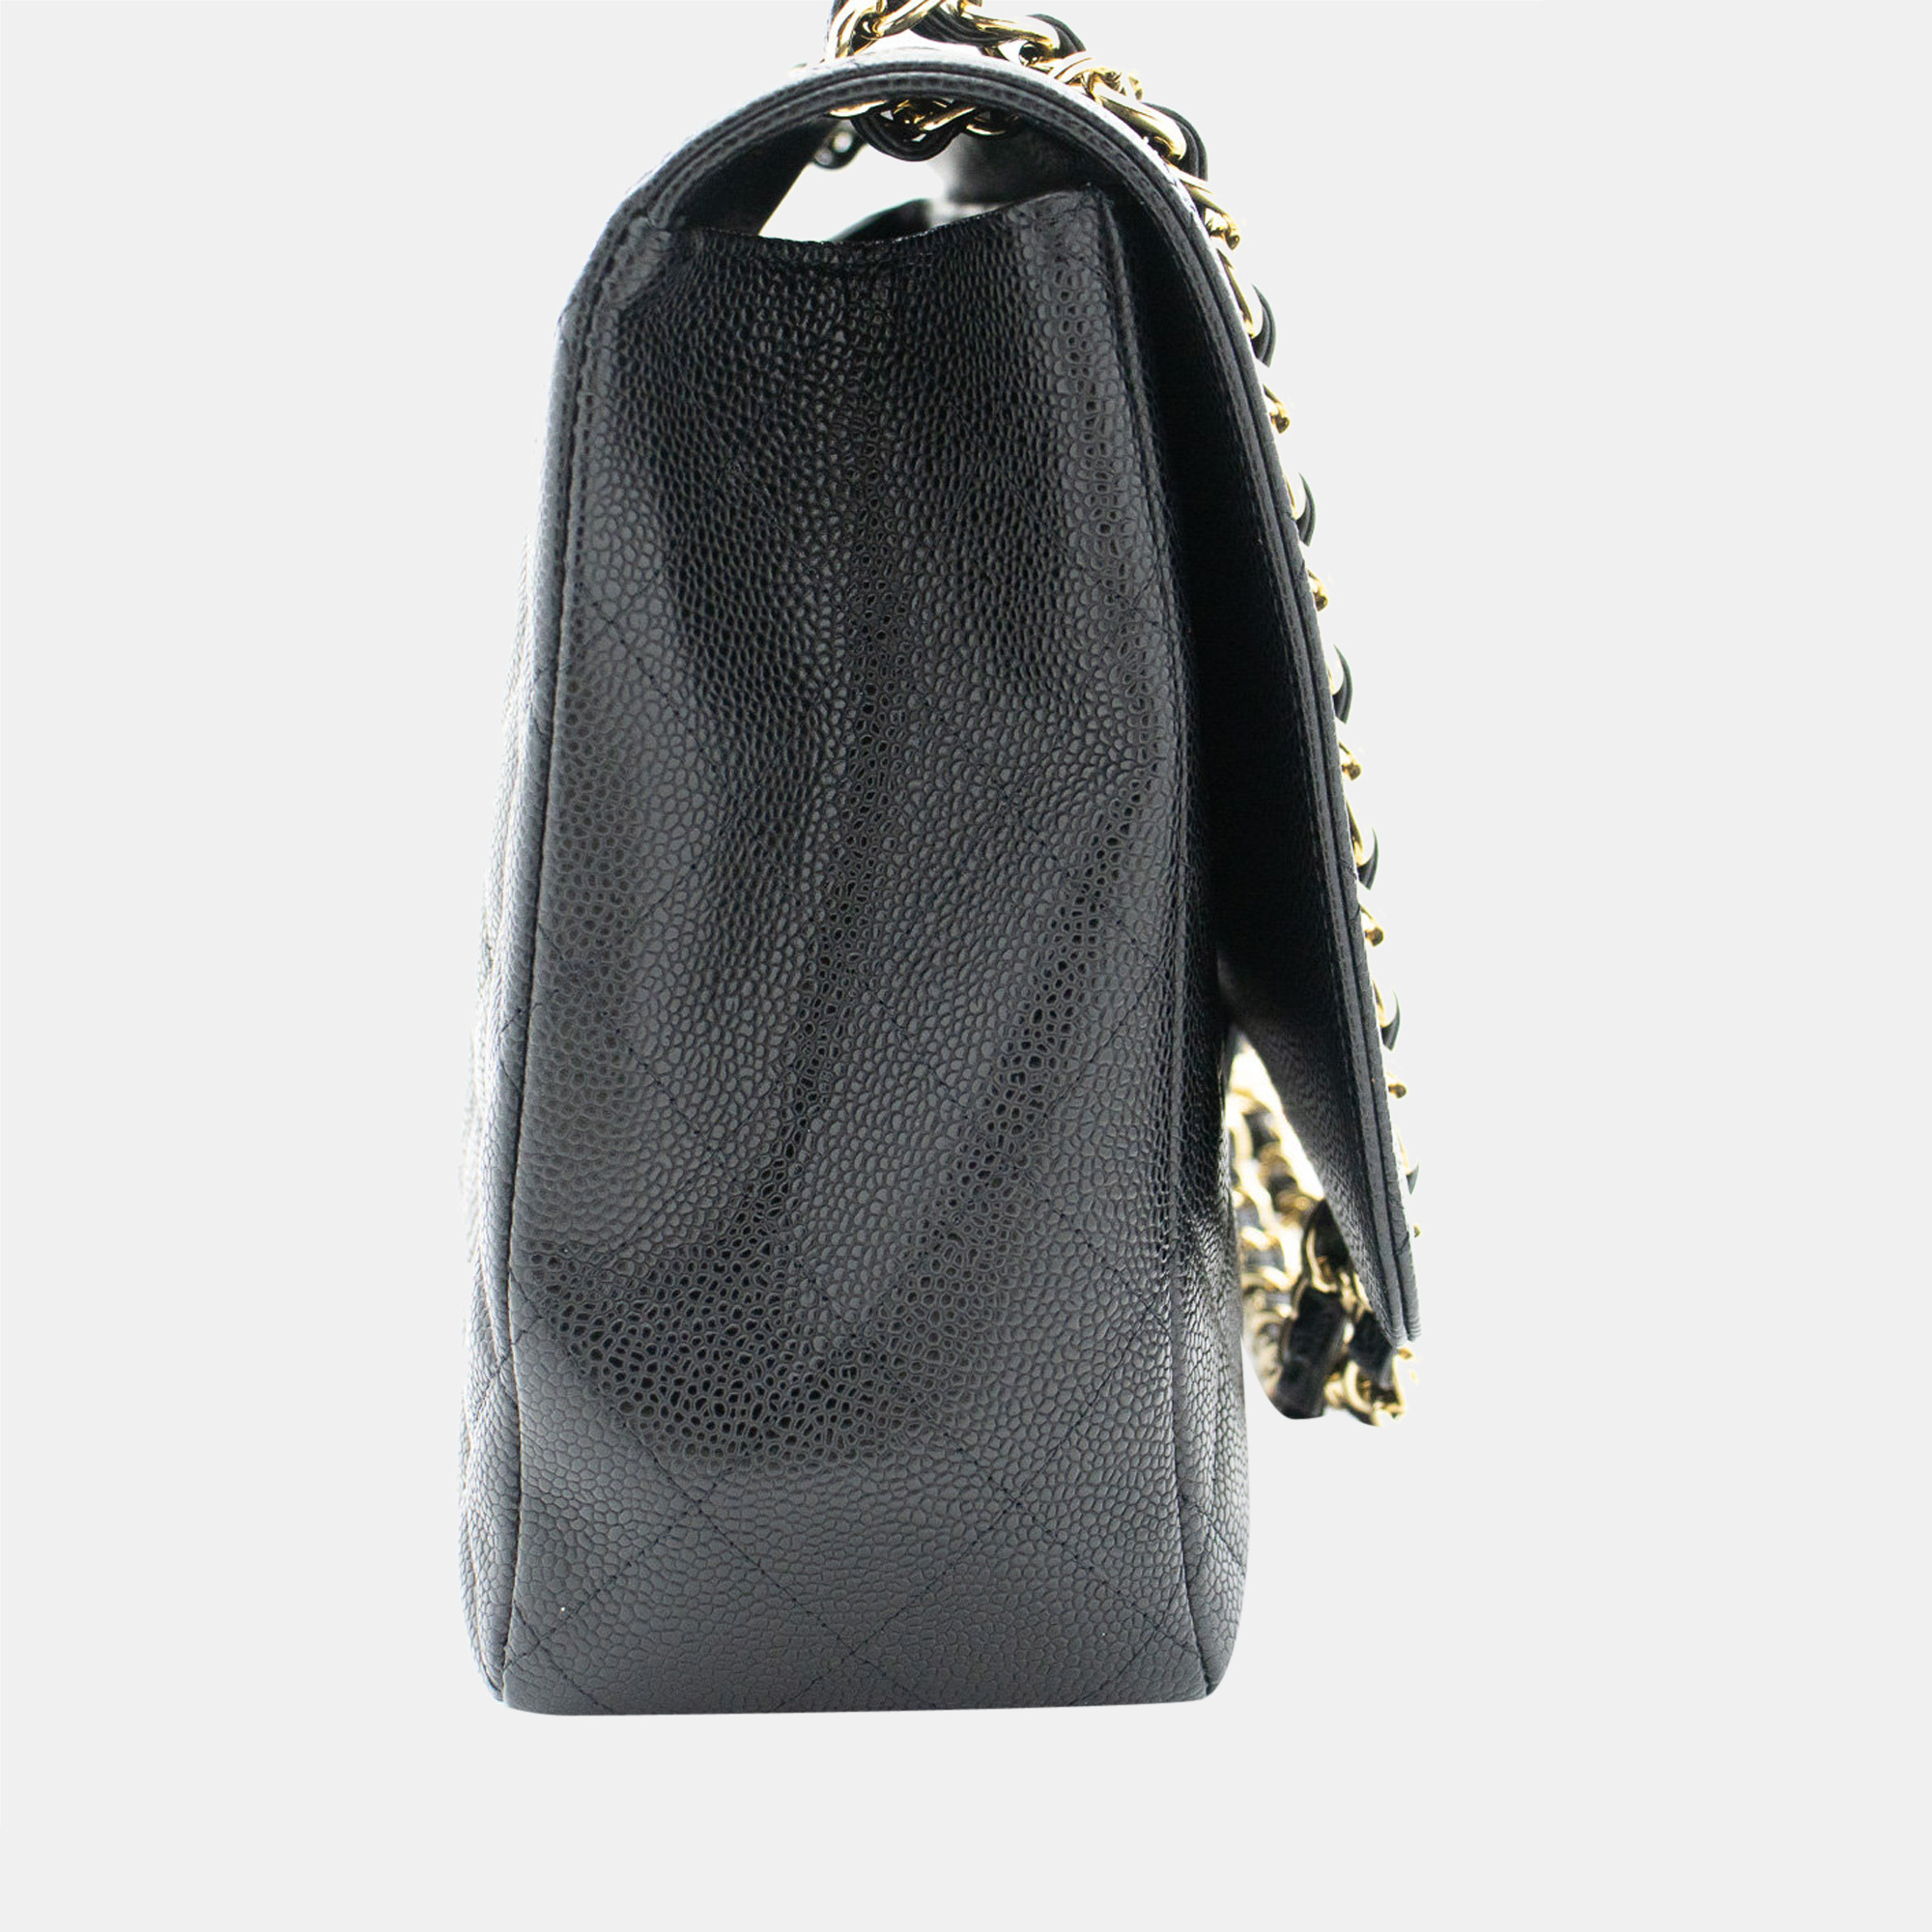 

Chanel Black Leather Timeless Classic Flap bag